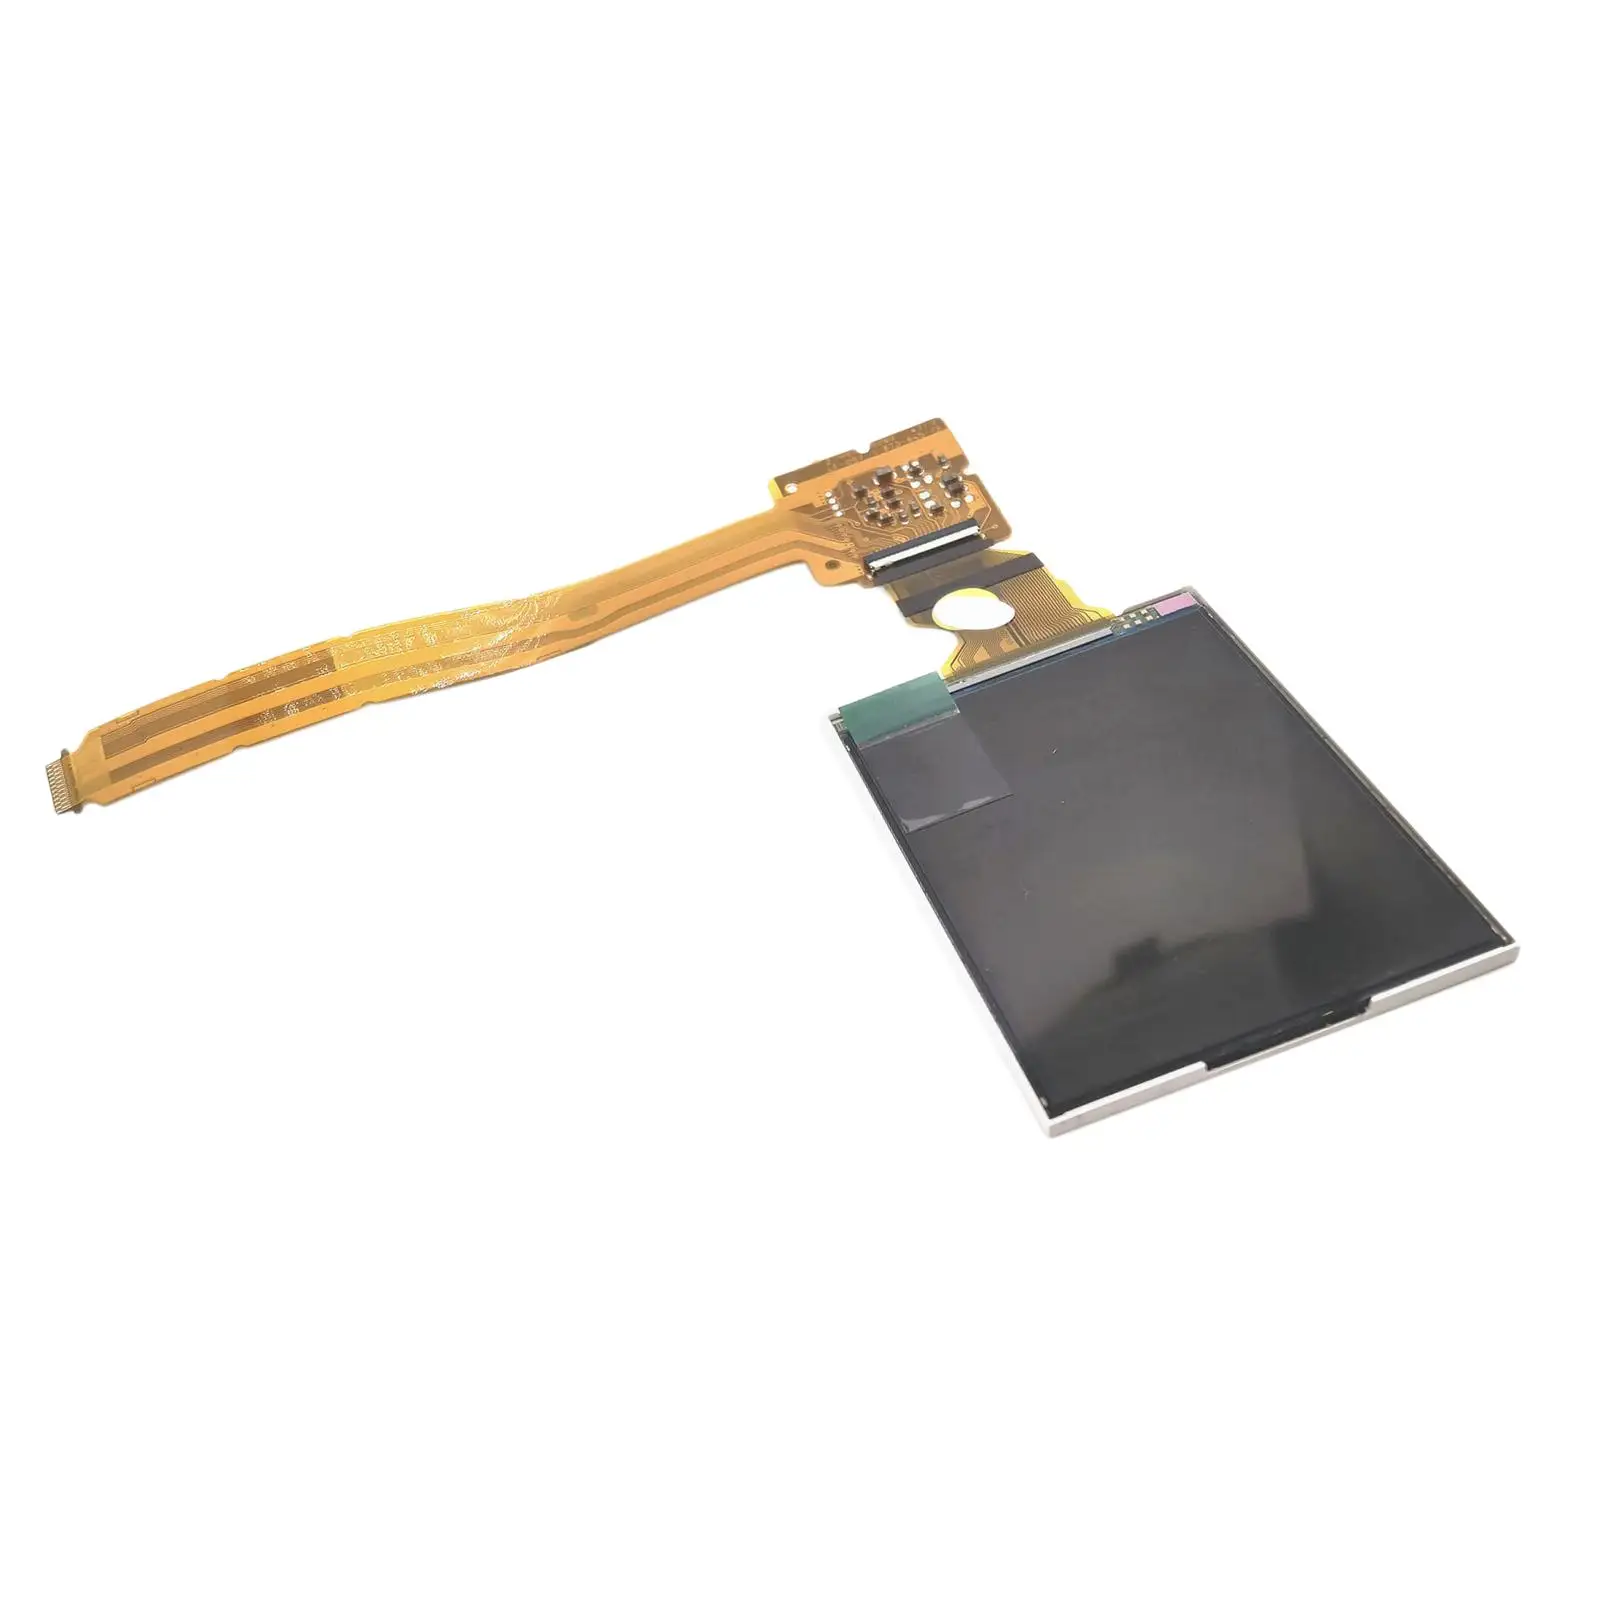 Replacements LCD Display Screen Spare Parts with Cable for DSLR A200 A300 A350 Camera Repair Parts